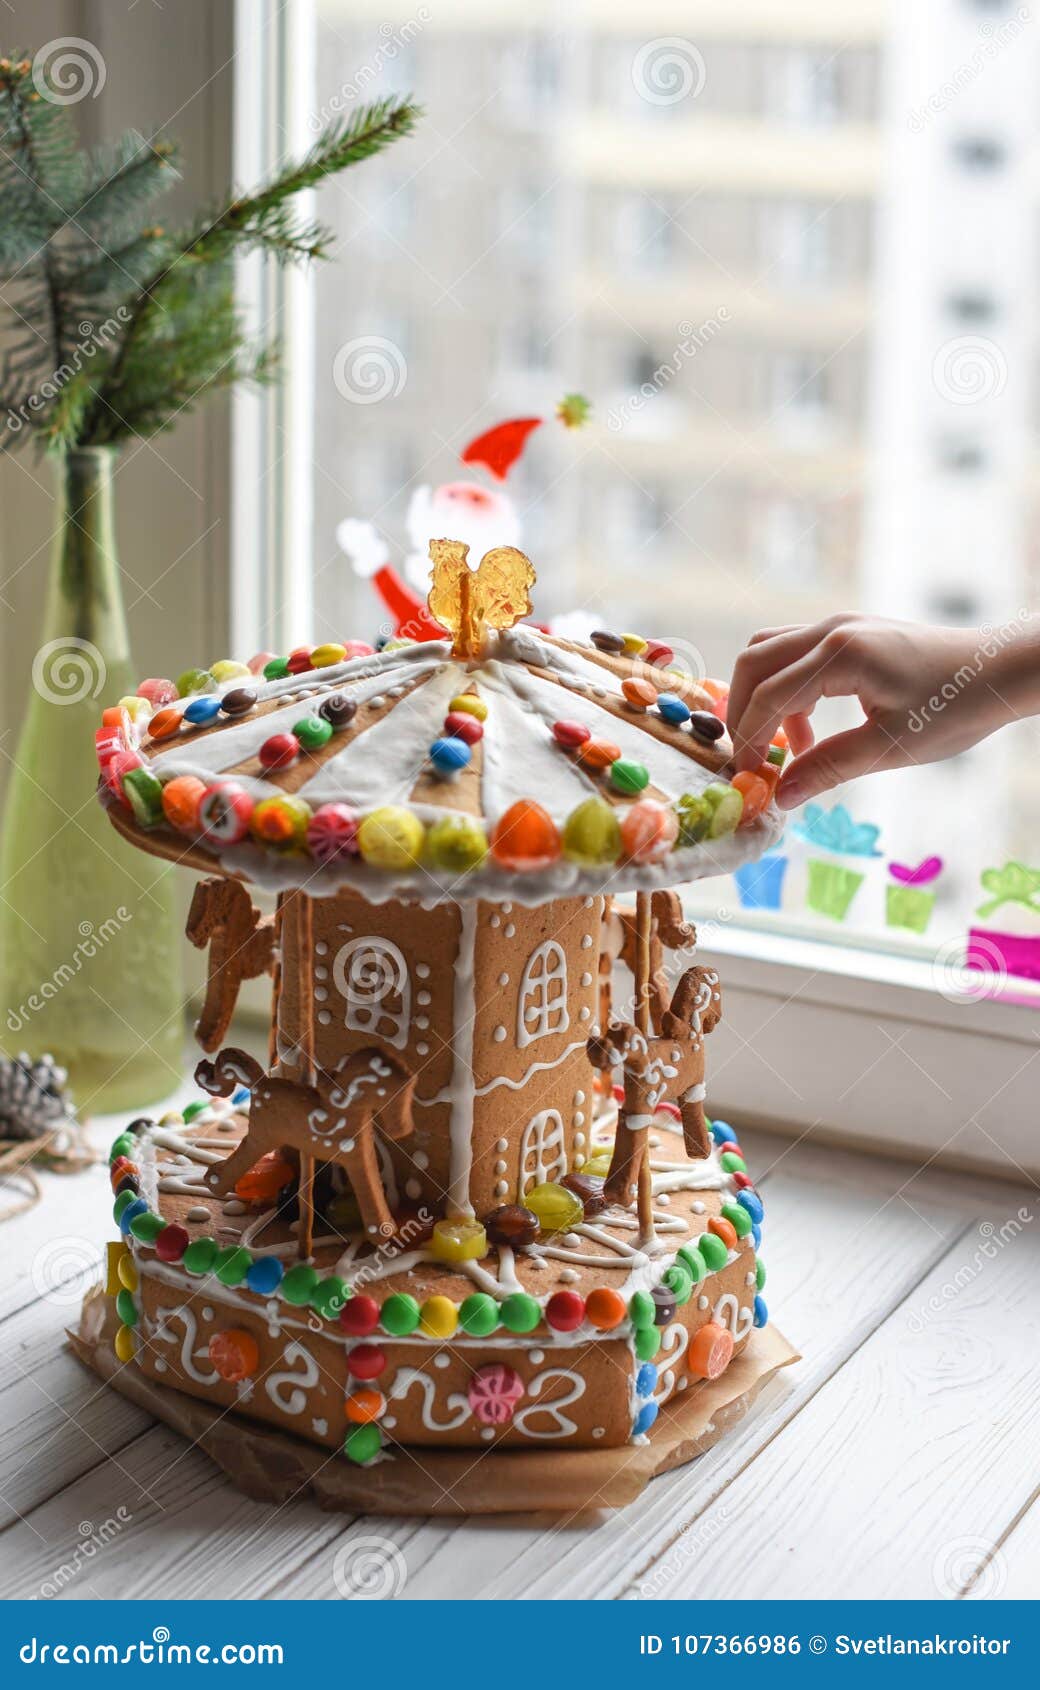 A Gingerbread Carousel and Some Christmas Decoration Elements on a ...